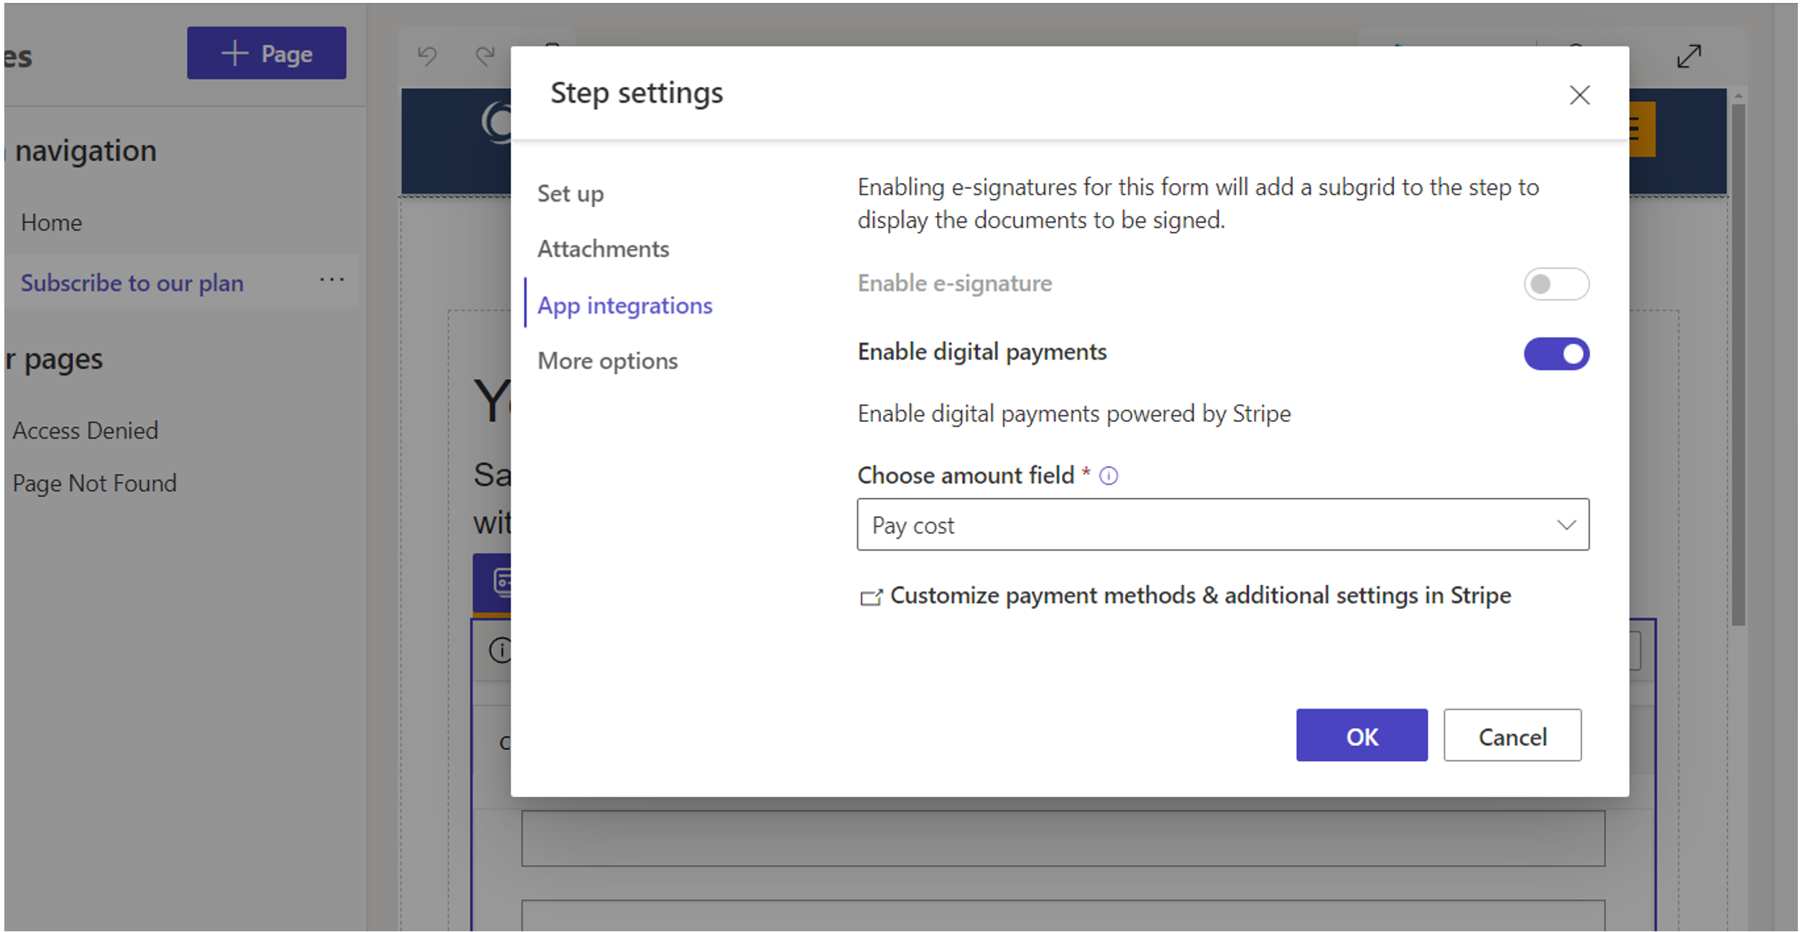 An image showing the digital payment in Power Pages.